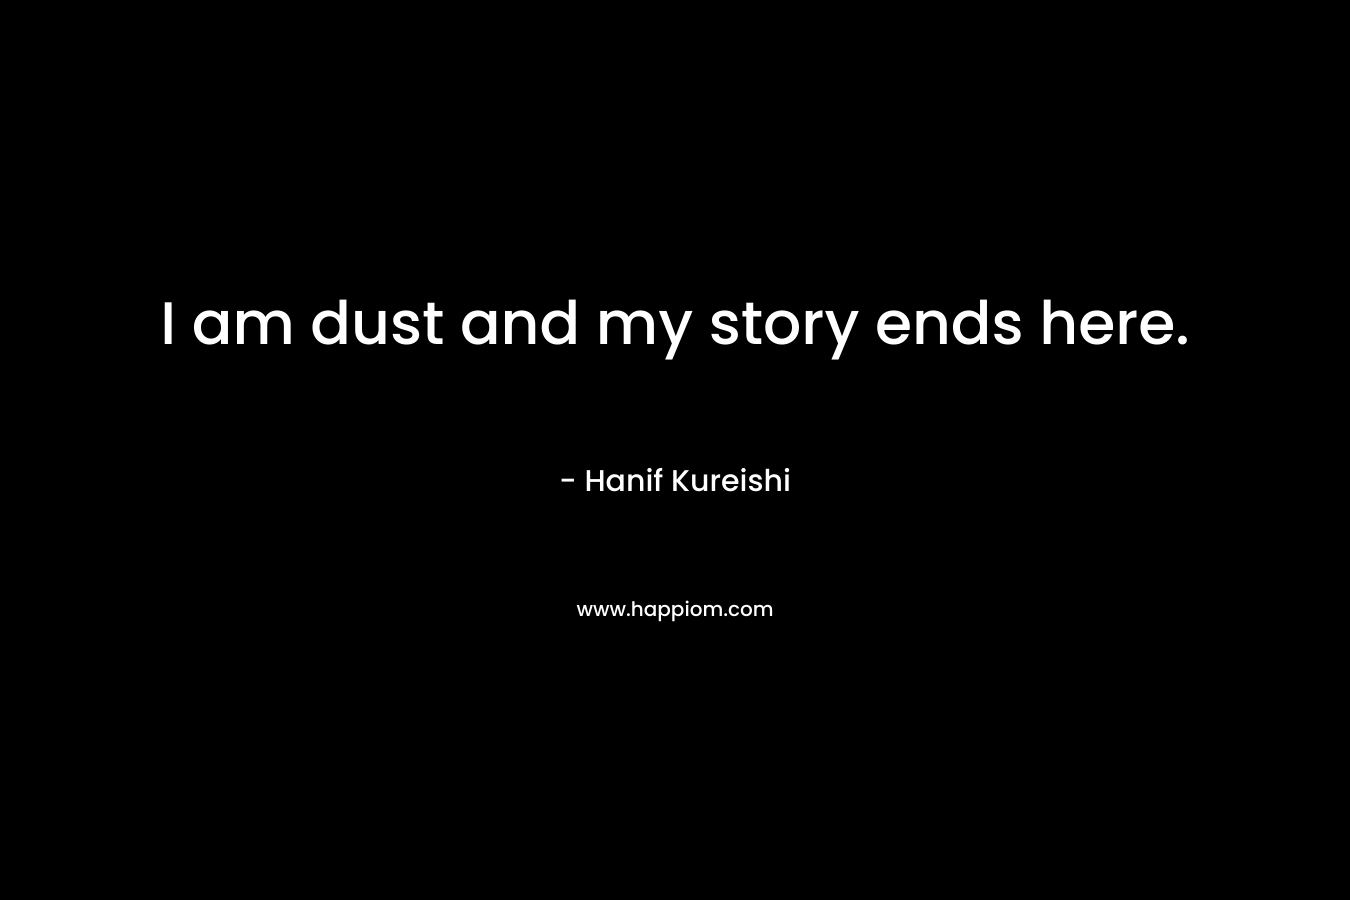 I am dust and my story ends here. – Hanif Kureishi